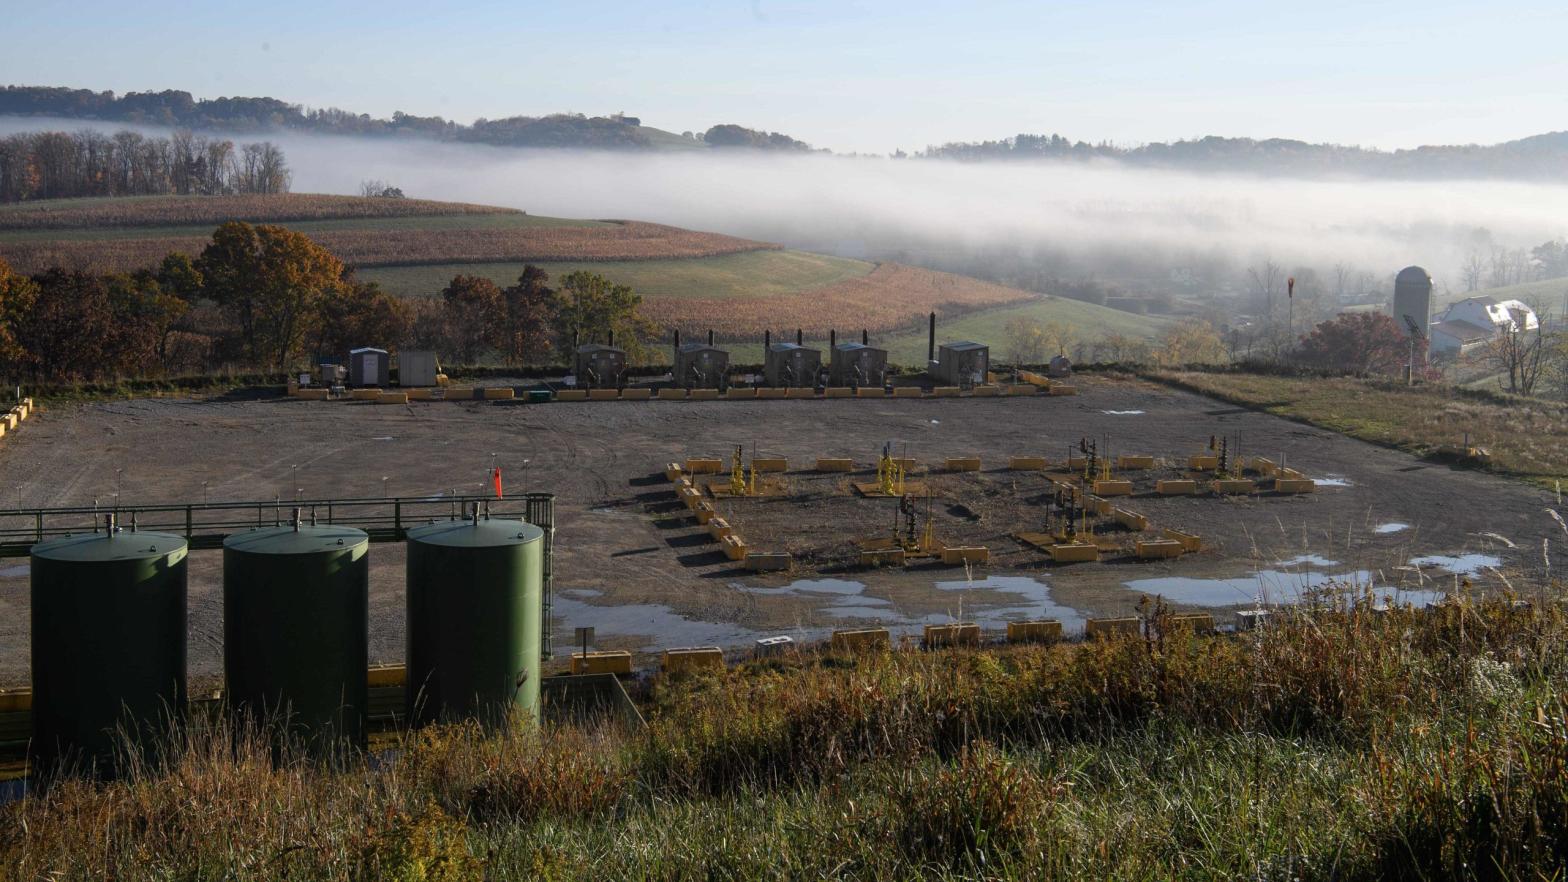 View of the Lusk fracking facility in Scenery Hill, Pennsylvania, on Oct. 22, 2020. (Photo: Nicholas Kamm, Getty Images)